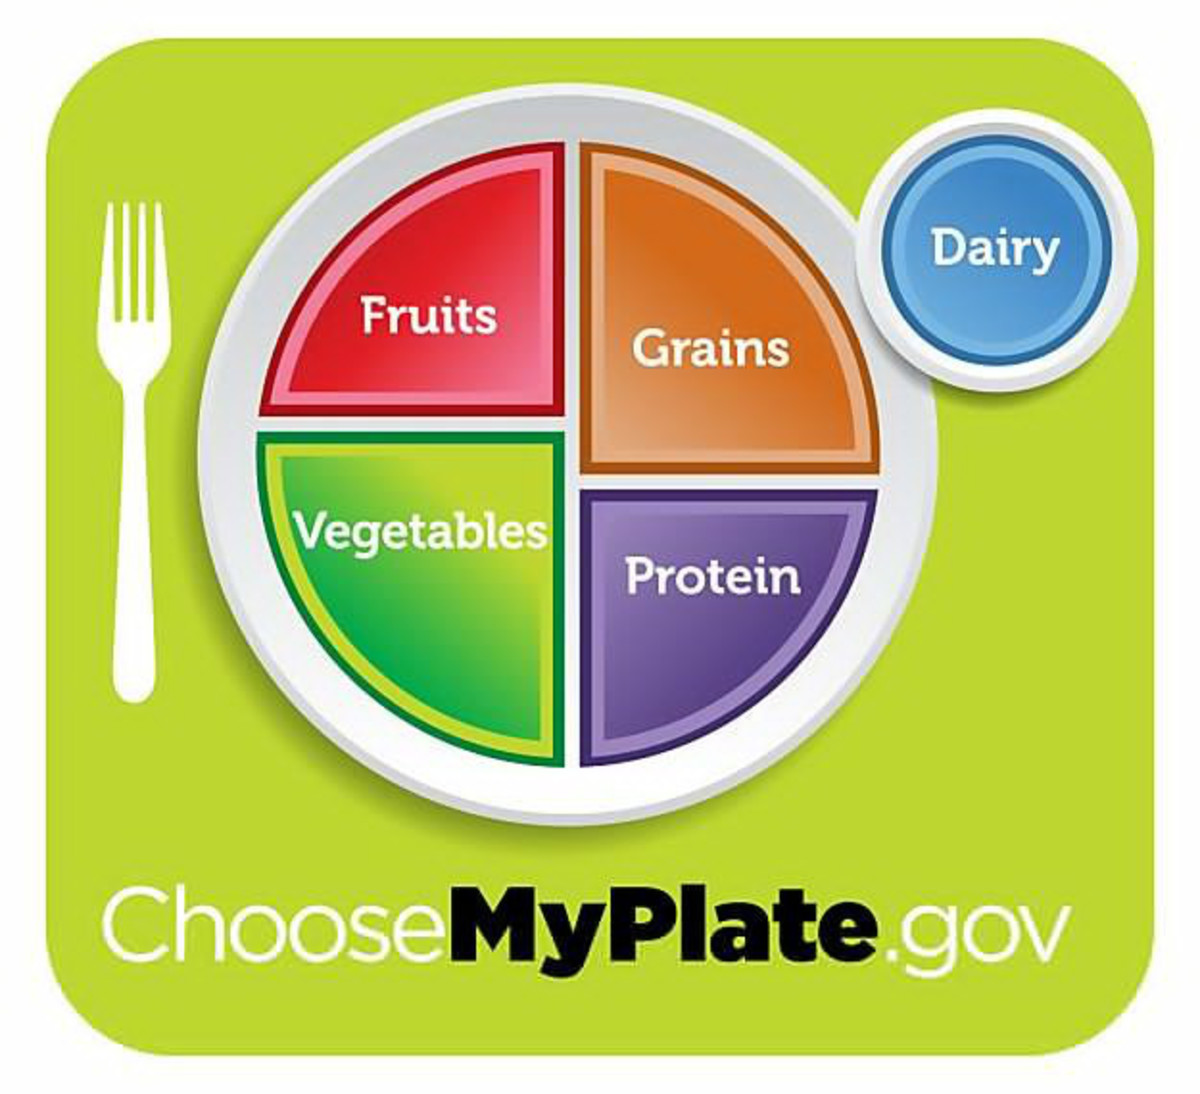 U.S. Government myplate.gov recommends food portions for your meals